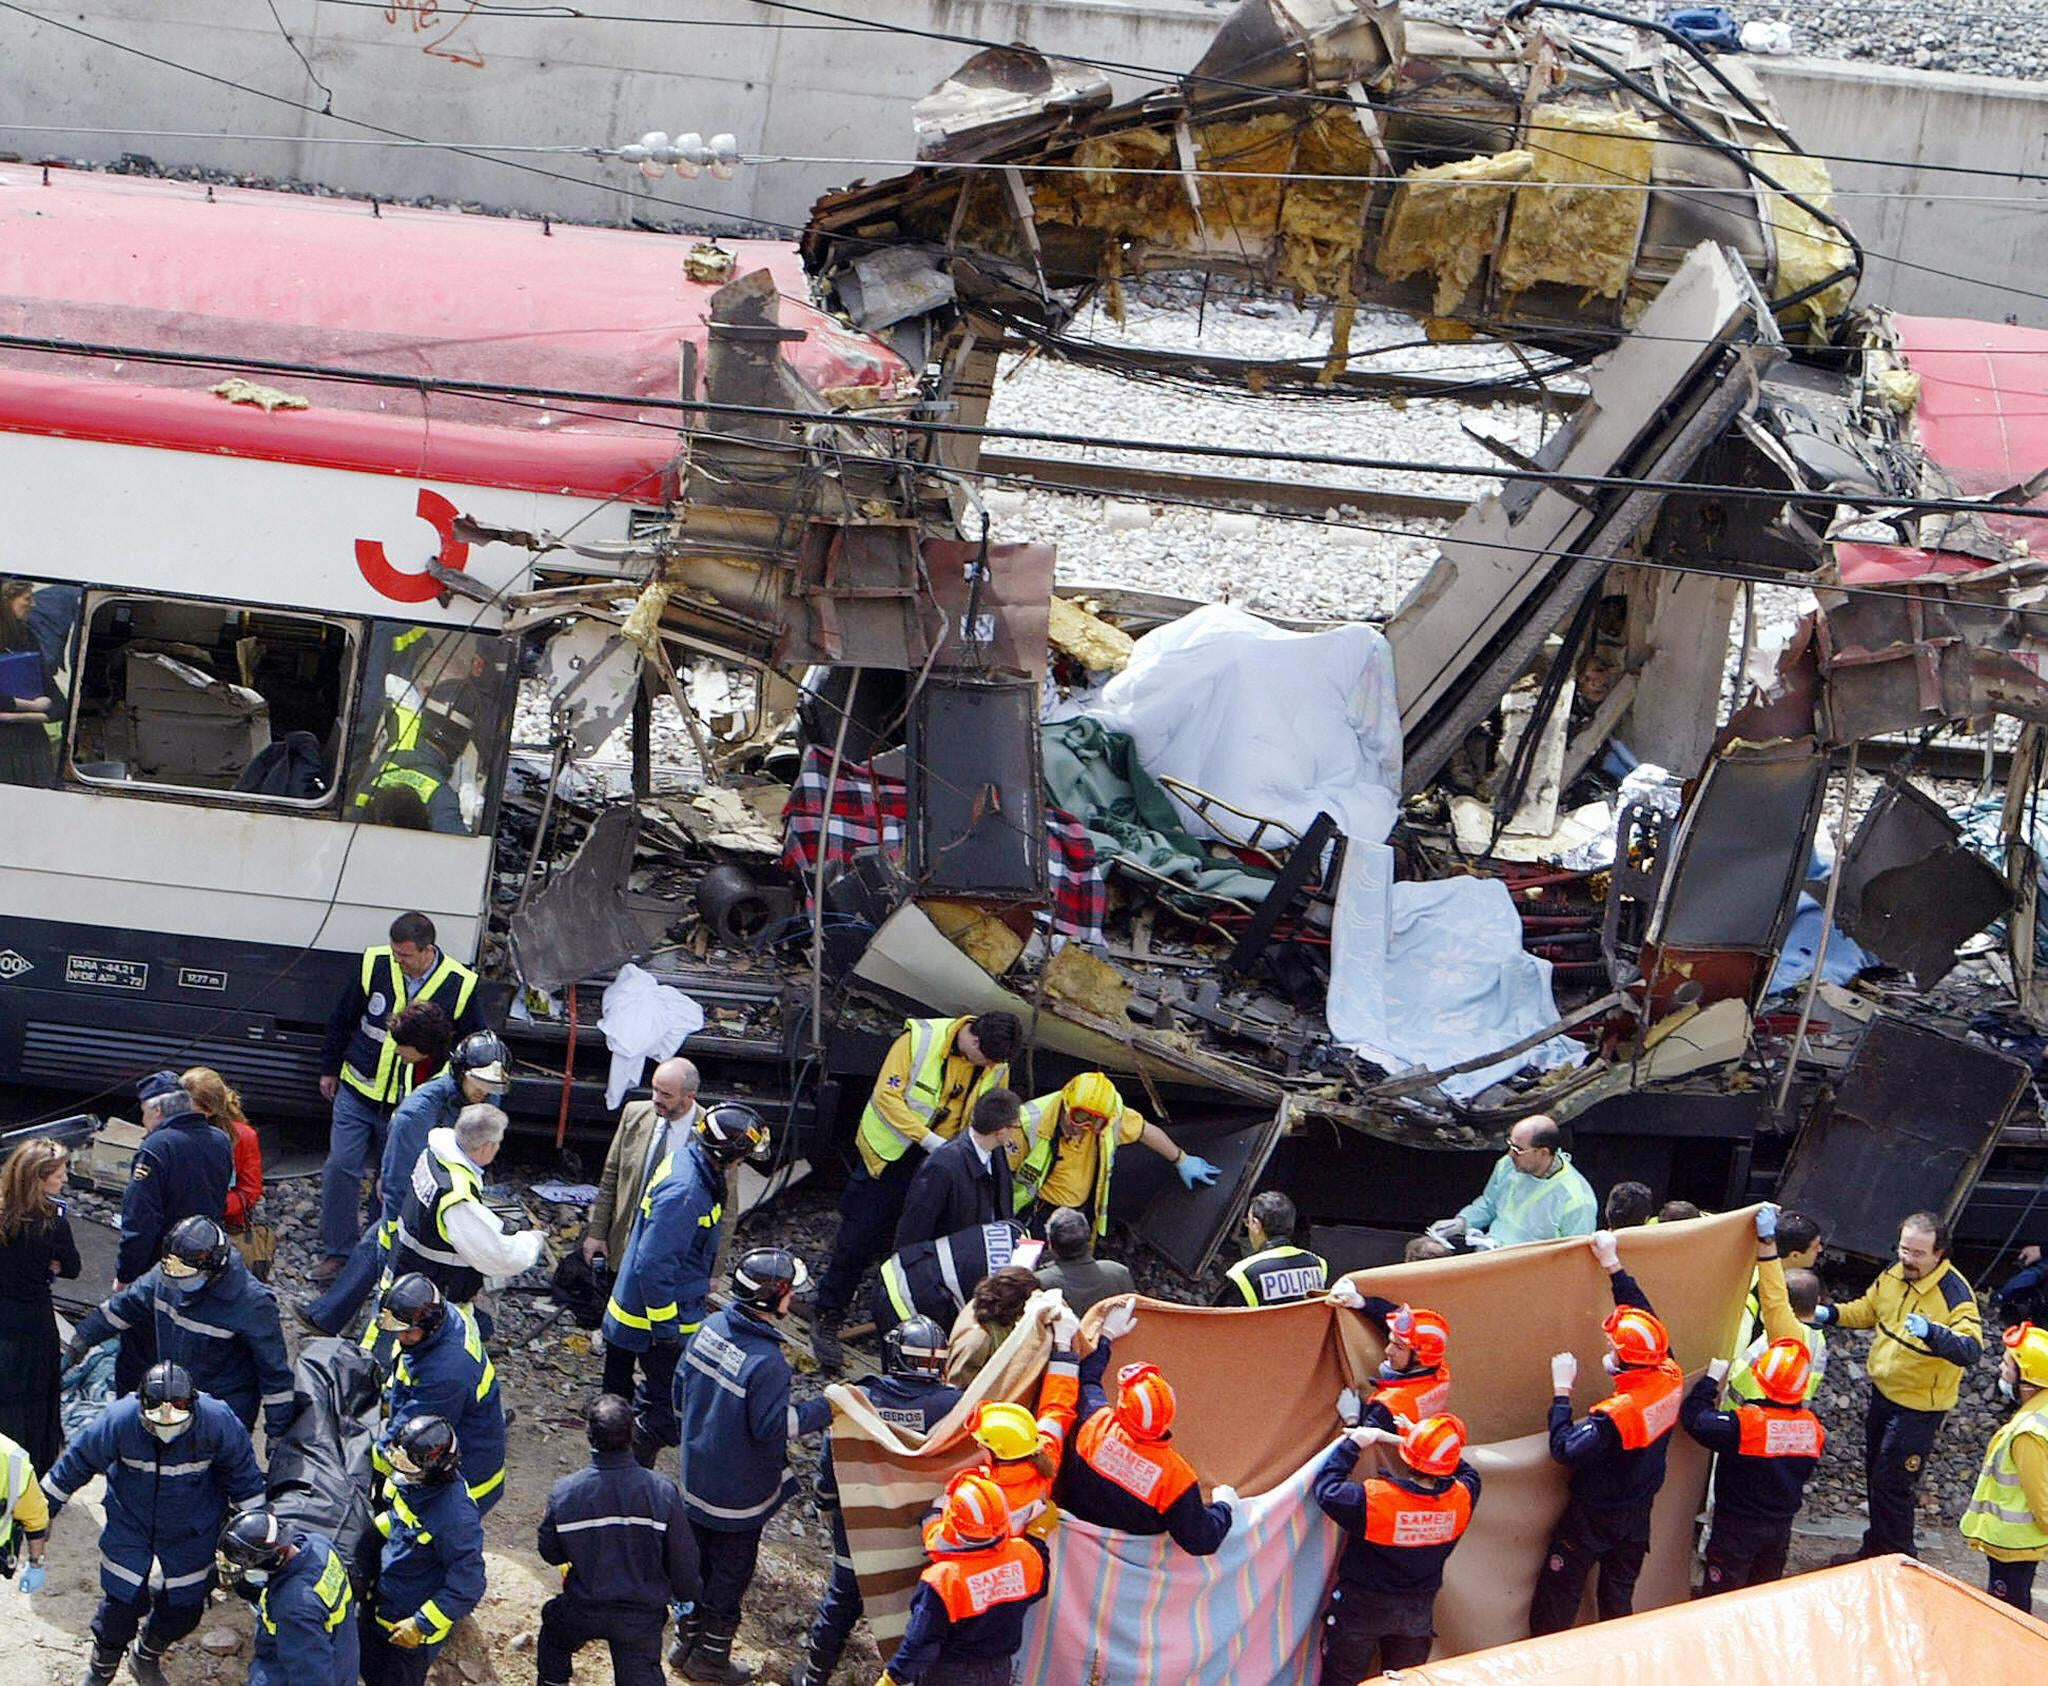 Emergency services at the scene of the Madrid train bombing disaster in 2004